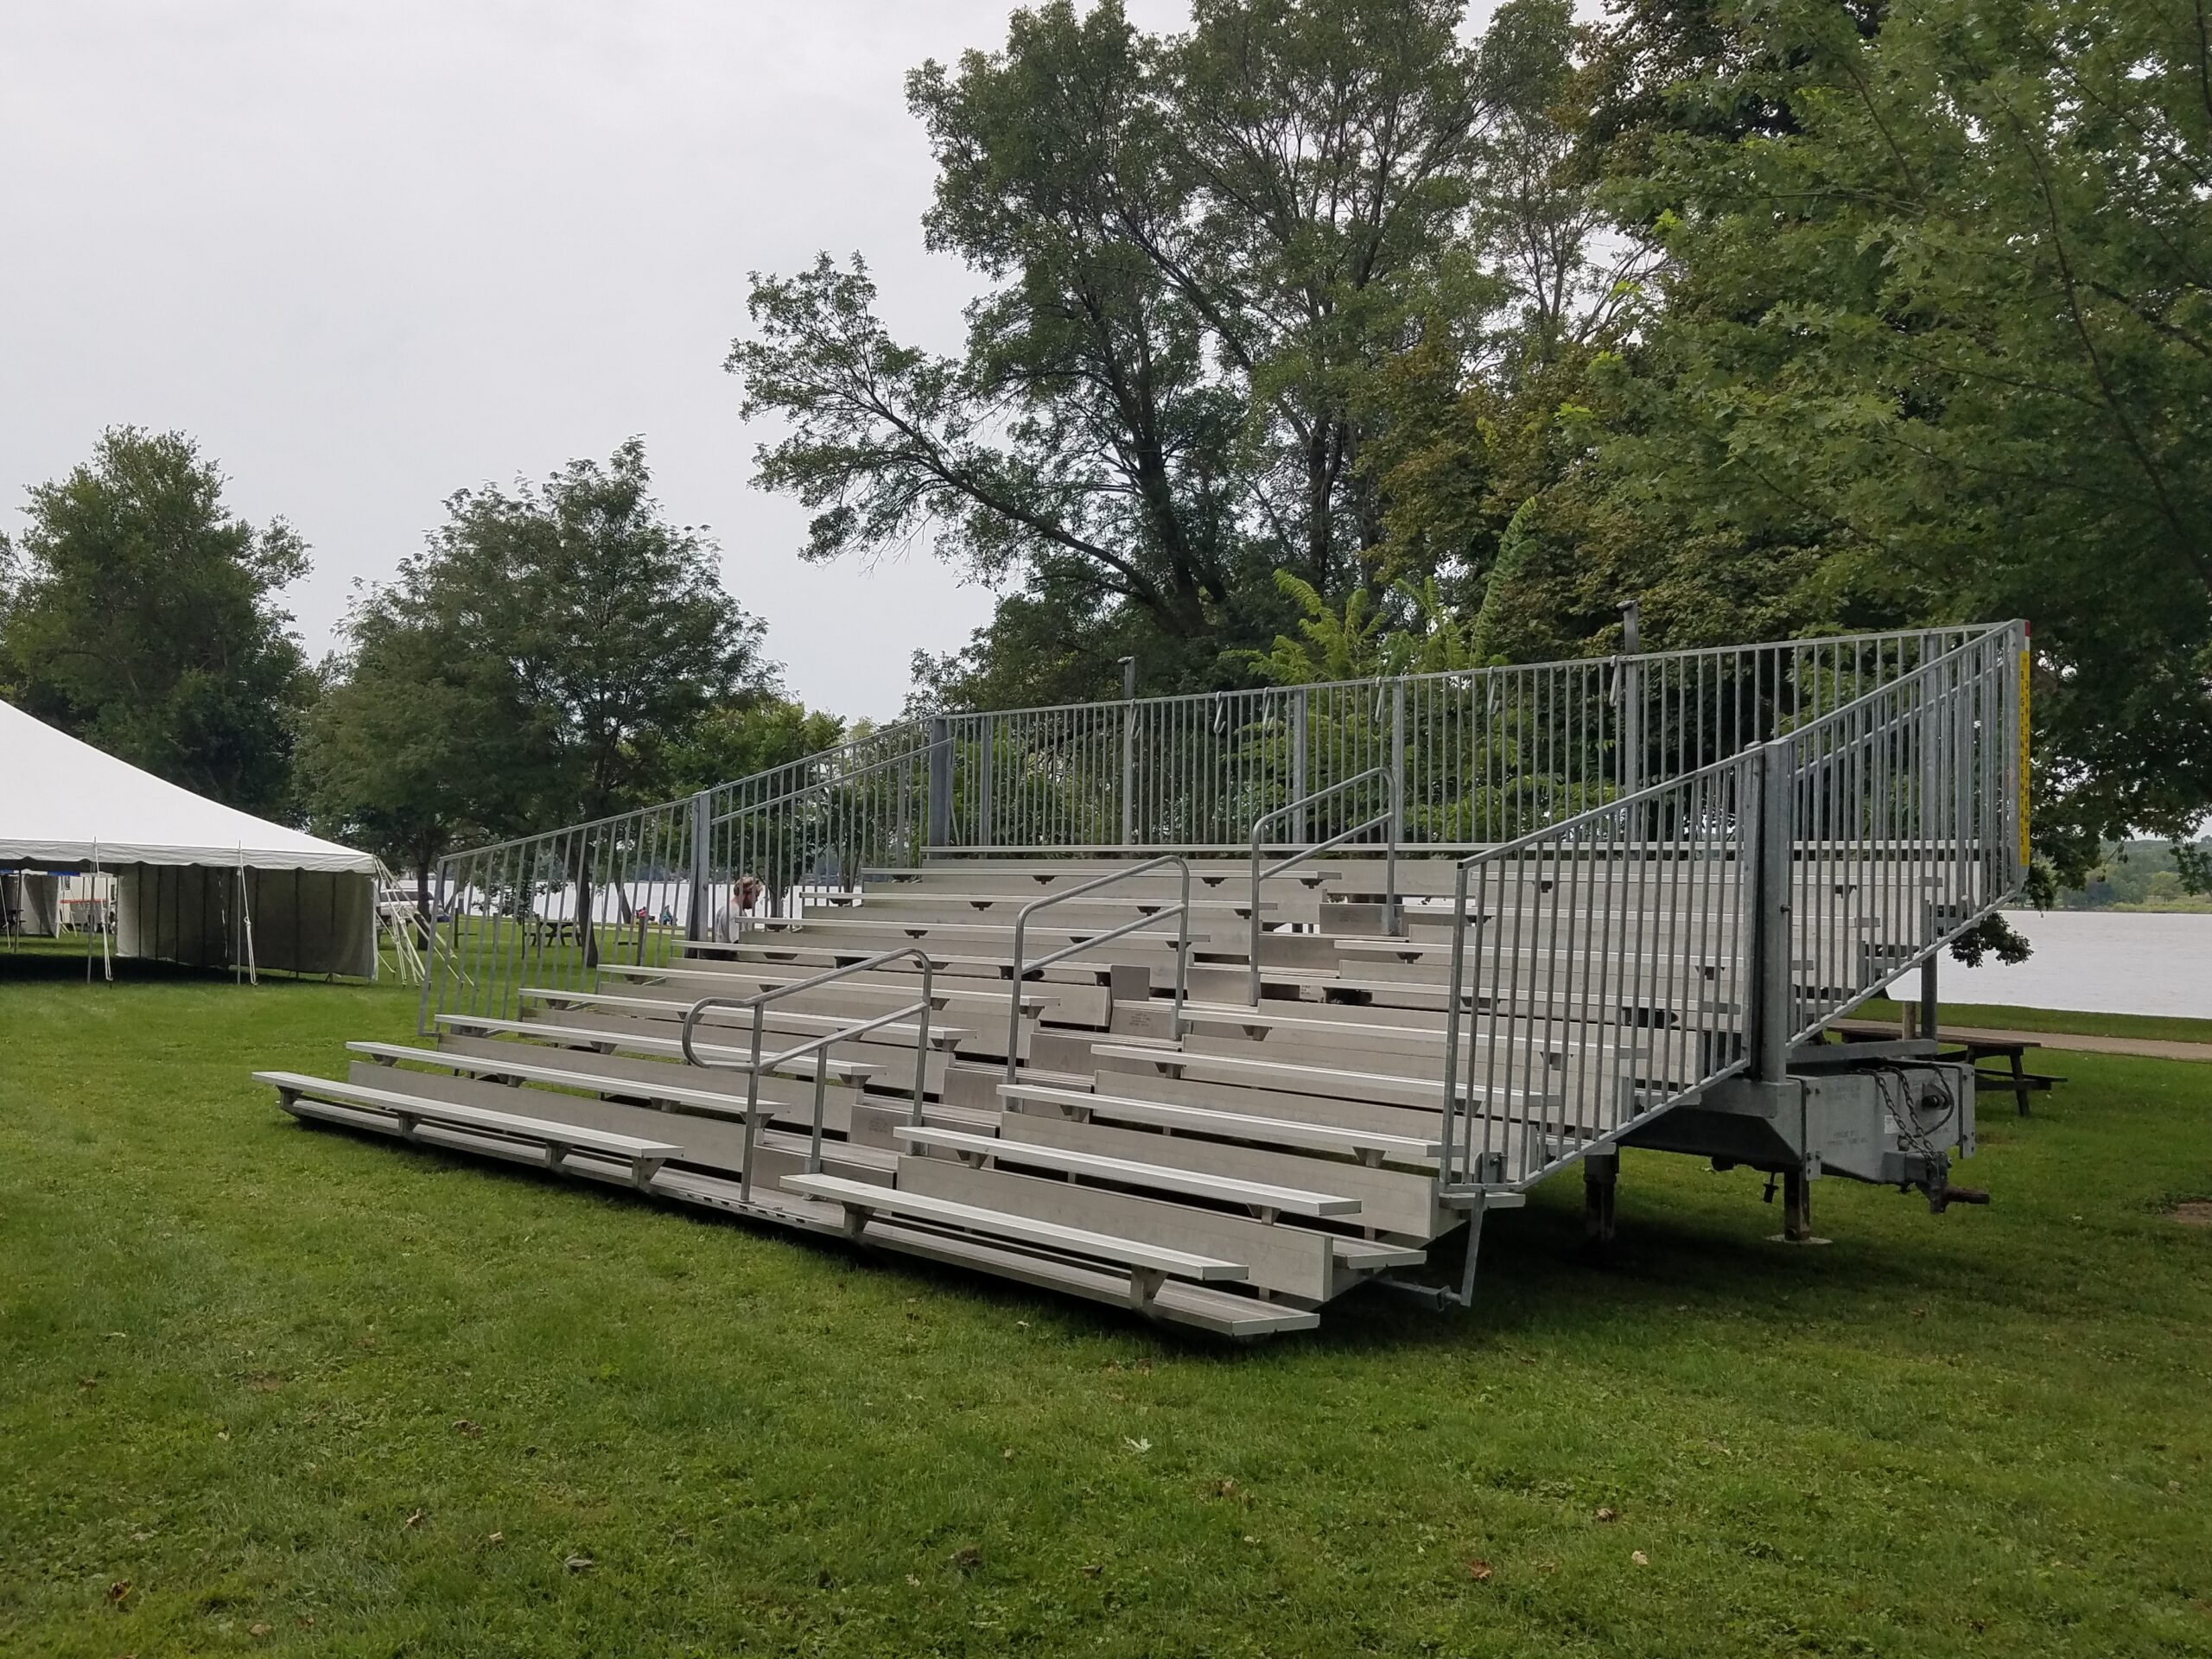 30' x 10 Row Hydraulic bleachers at a political event for Hillary Clinton at Illiniwek Campground in Hampton, IL